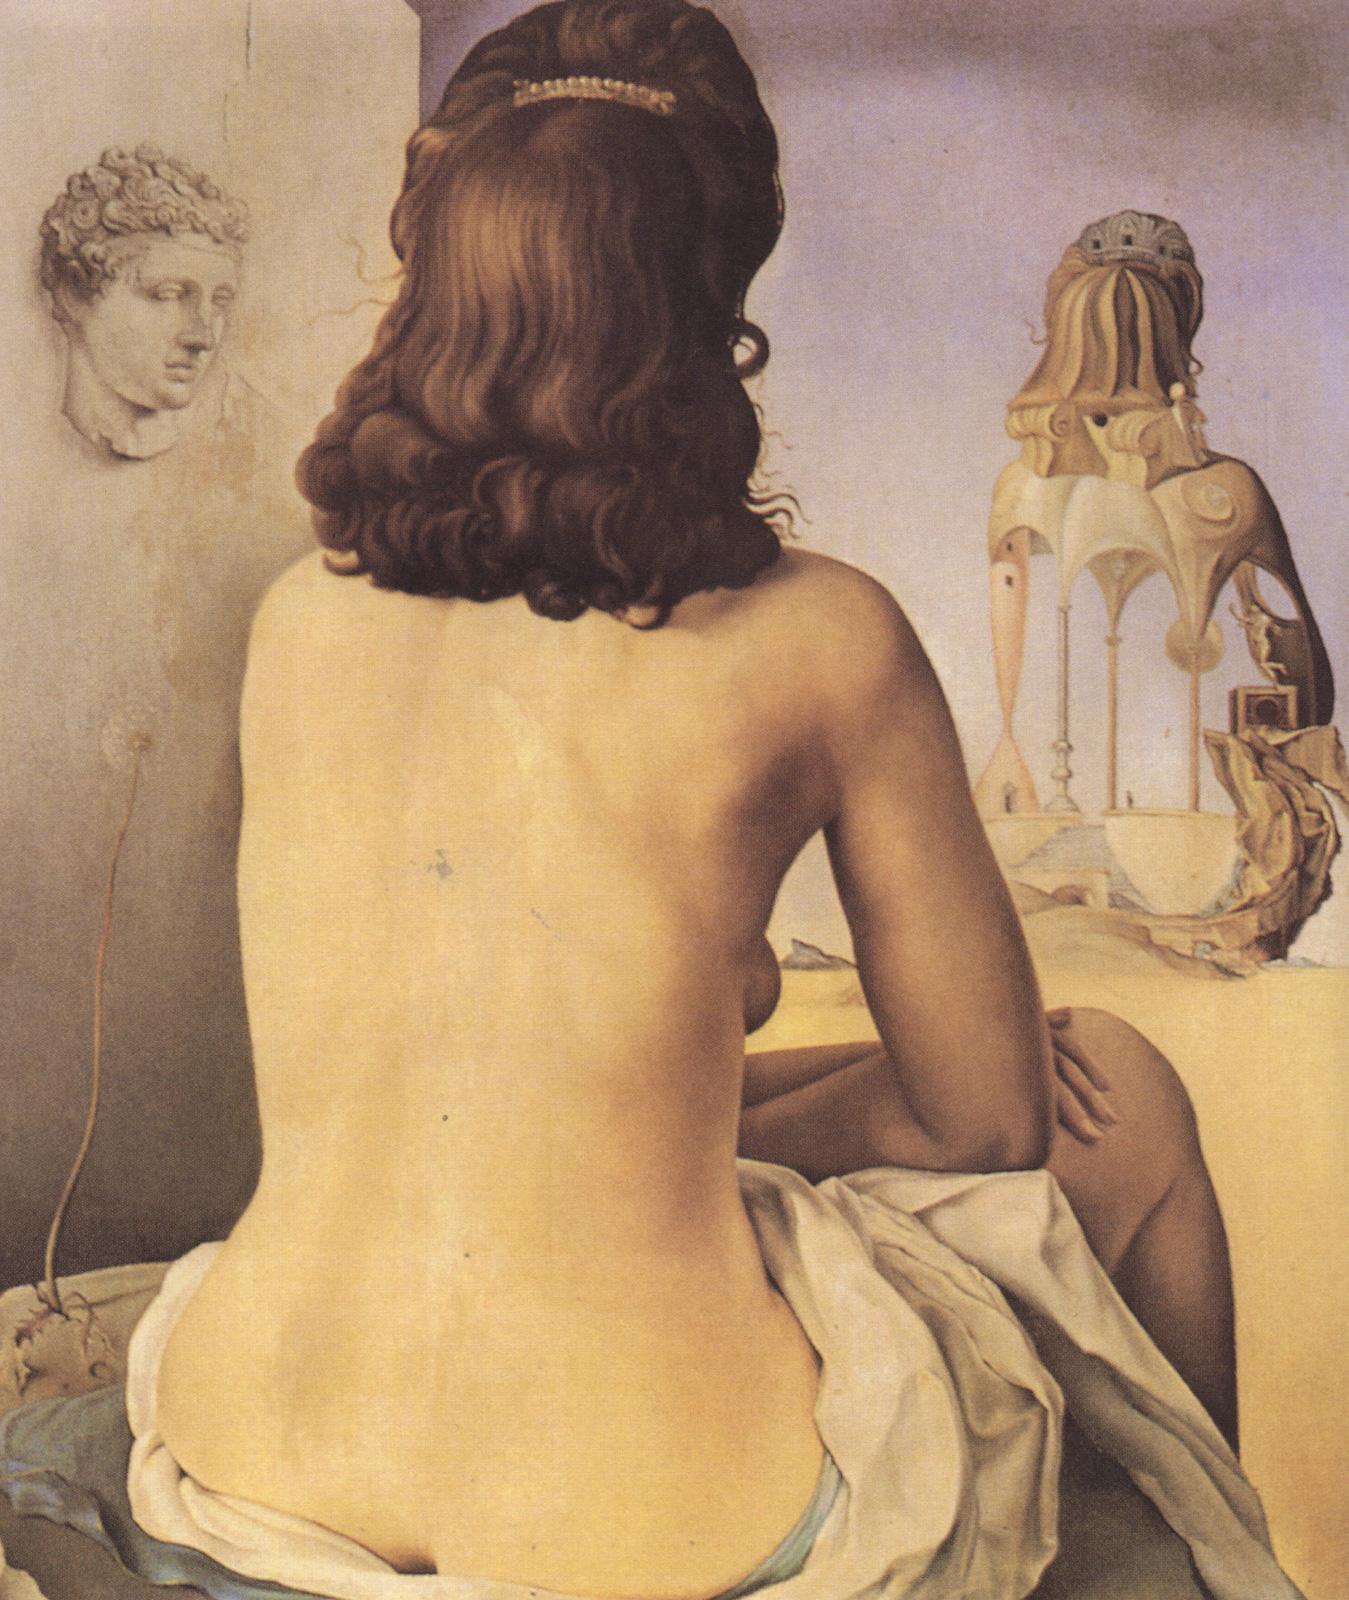 My Wife, Nude, Contemplating Her Own Flesh Becoming Stairs, Three Vertebrae of a Column, Sky and Architecture Salvador Dali, 1945